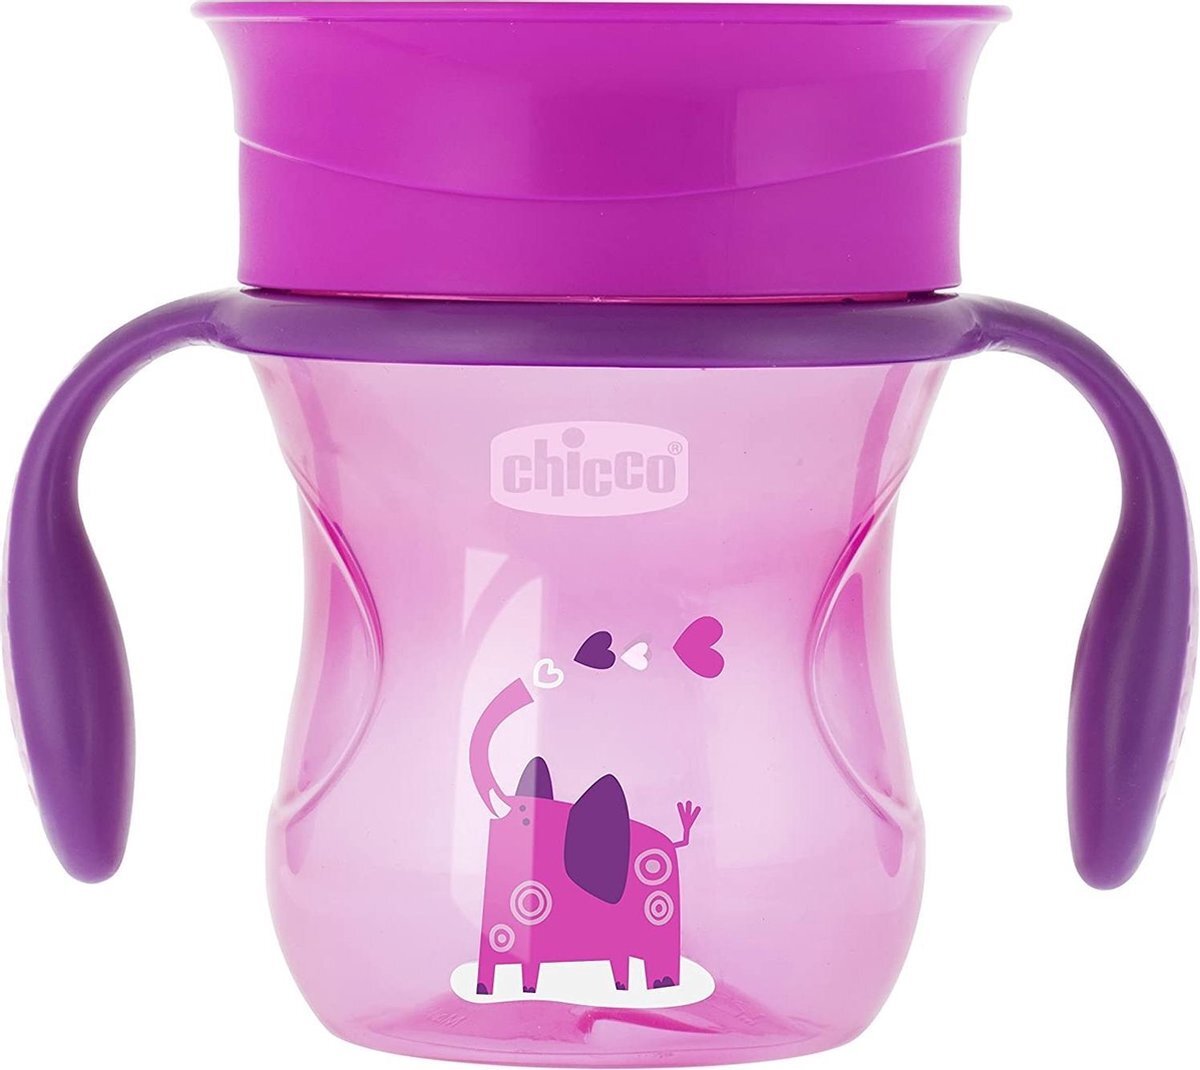 Chicco drinkbeker Perfect Cup junior 200 ml siliconen roze roze